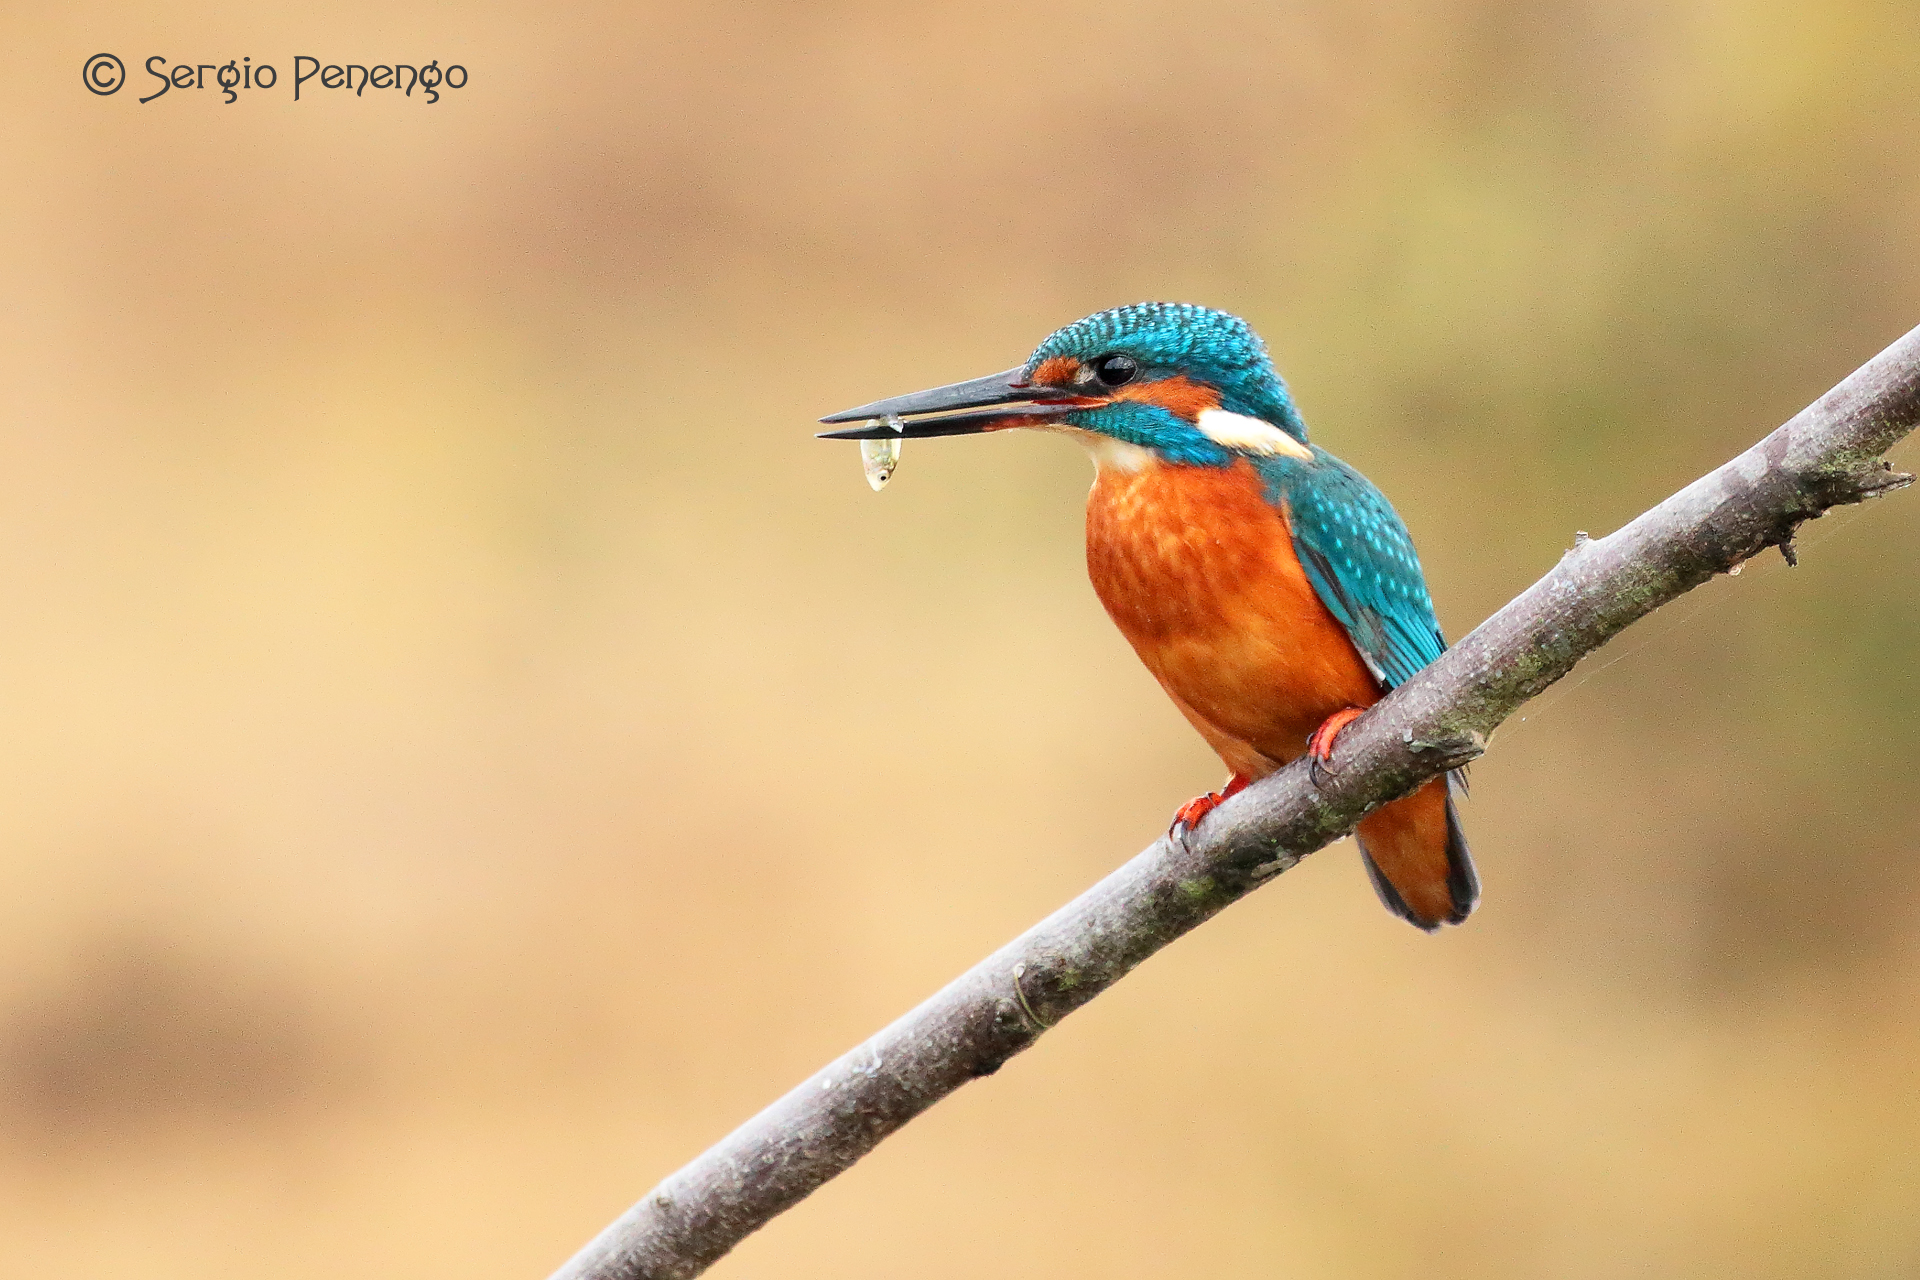 "Kingfisher with prey"...